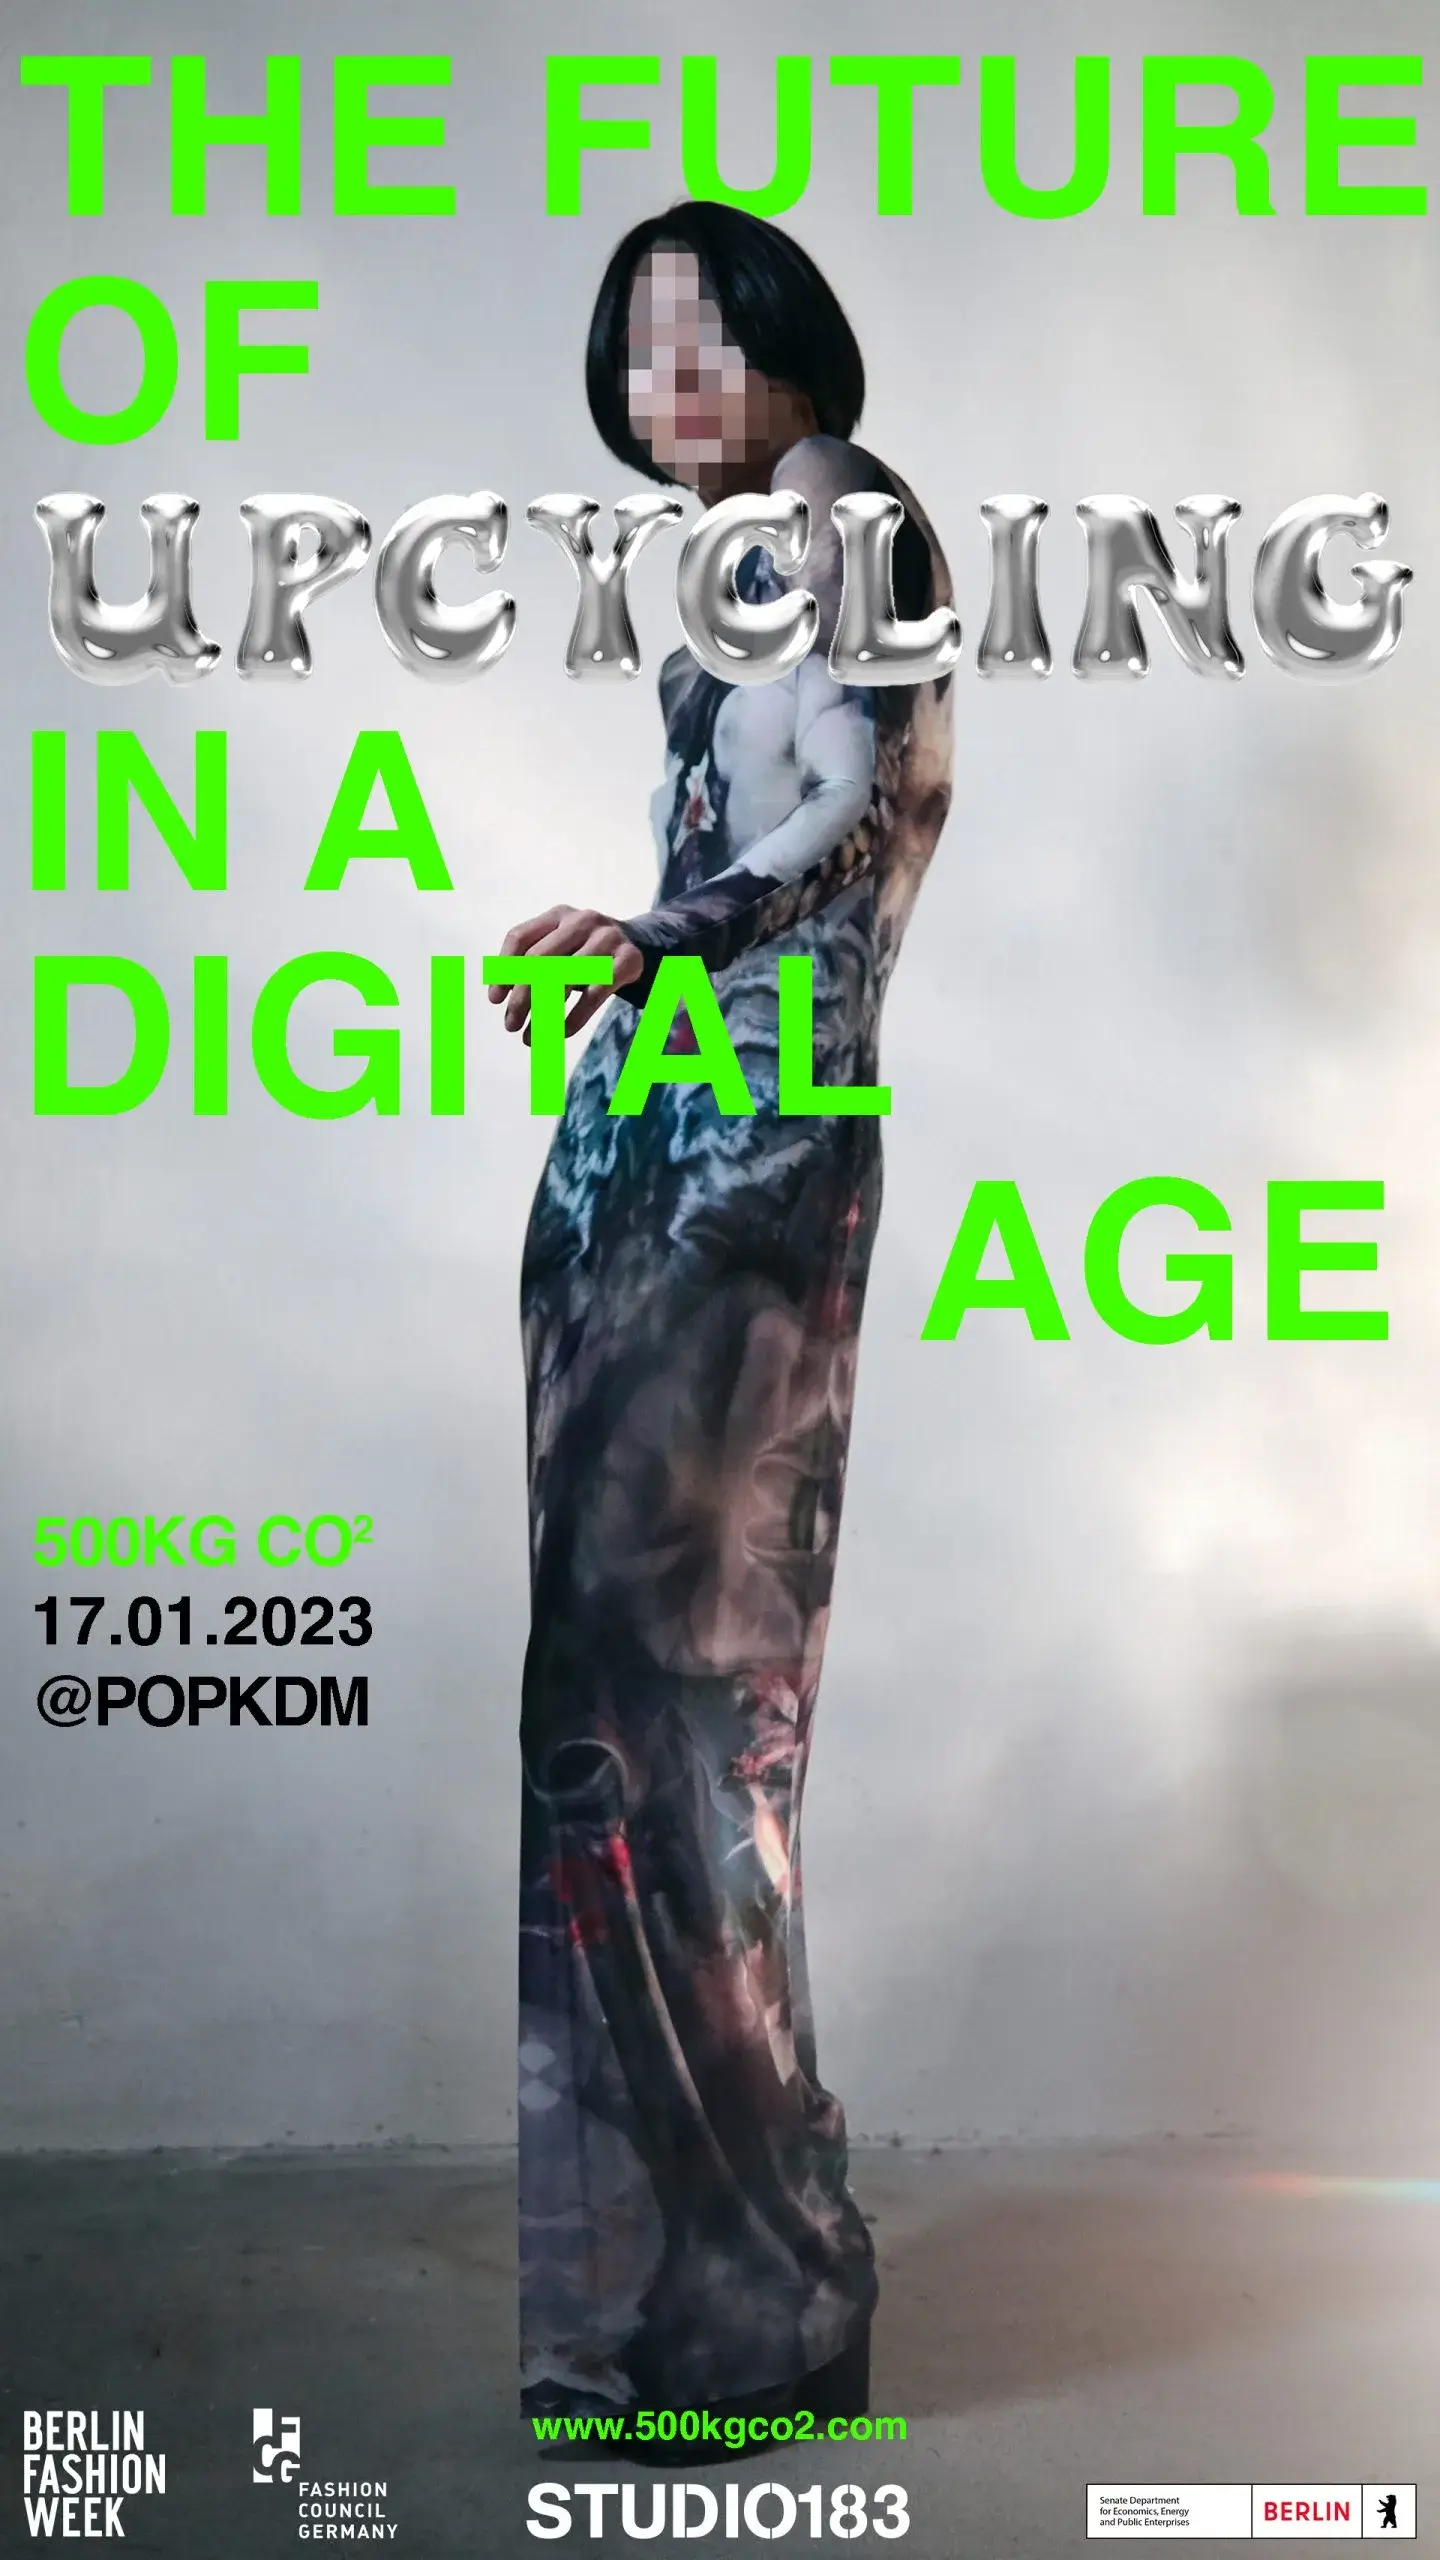 Poster about The Future of Upcycling in a Digital Age